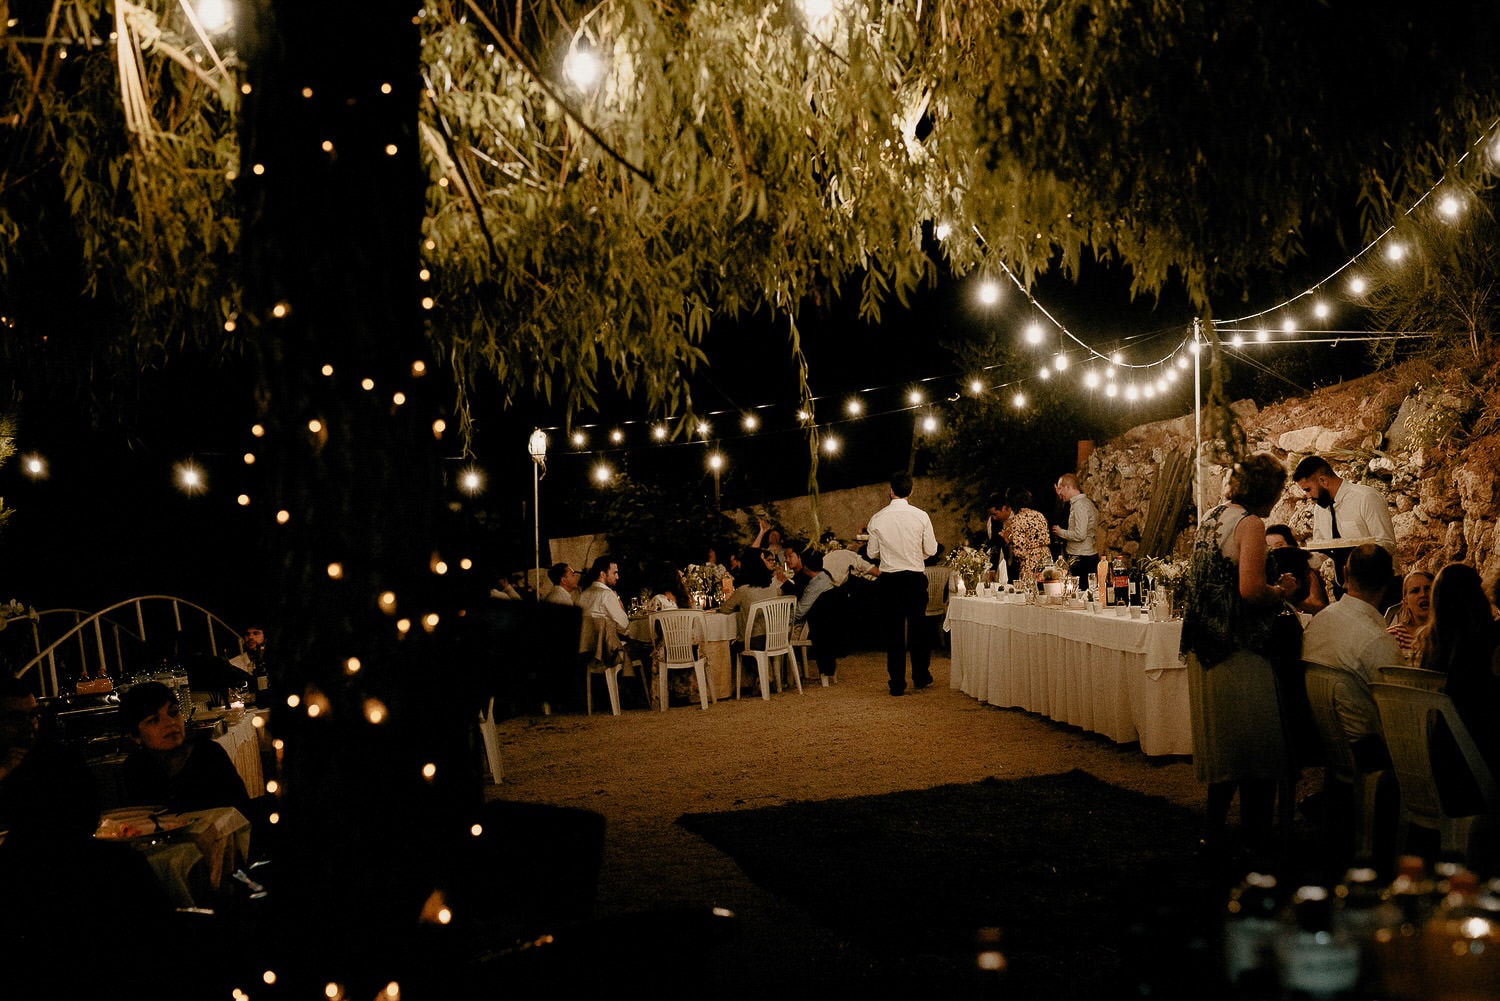 Charming Destination Wedding in the Portuguese Countryside - night time decorations with fairy lights and candles